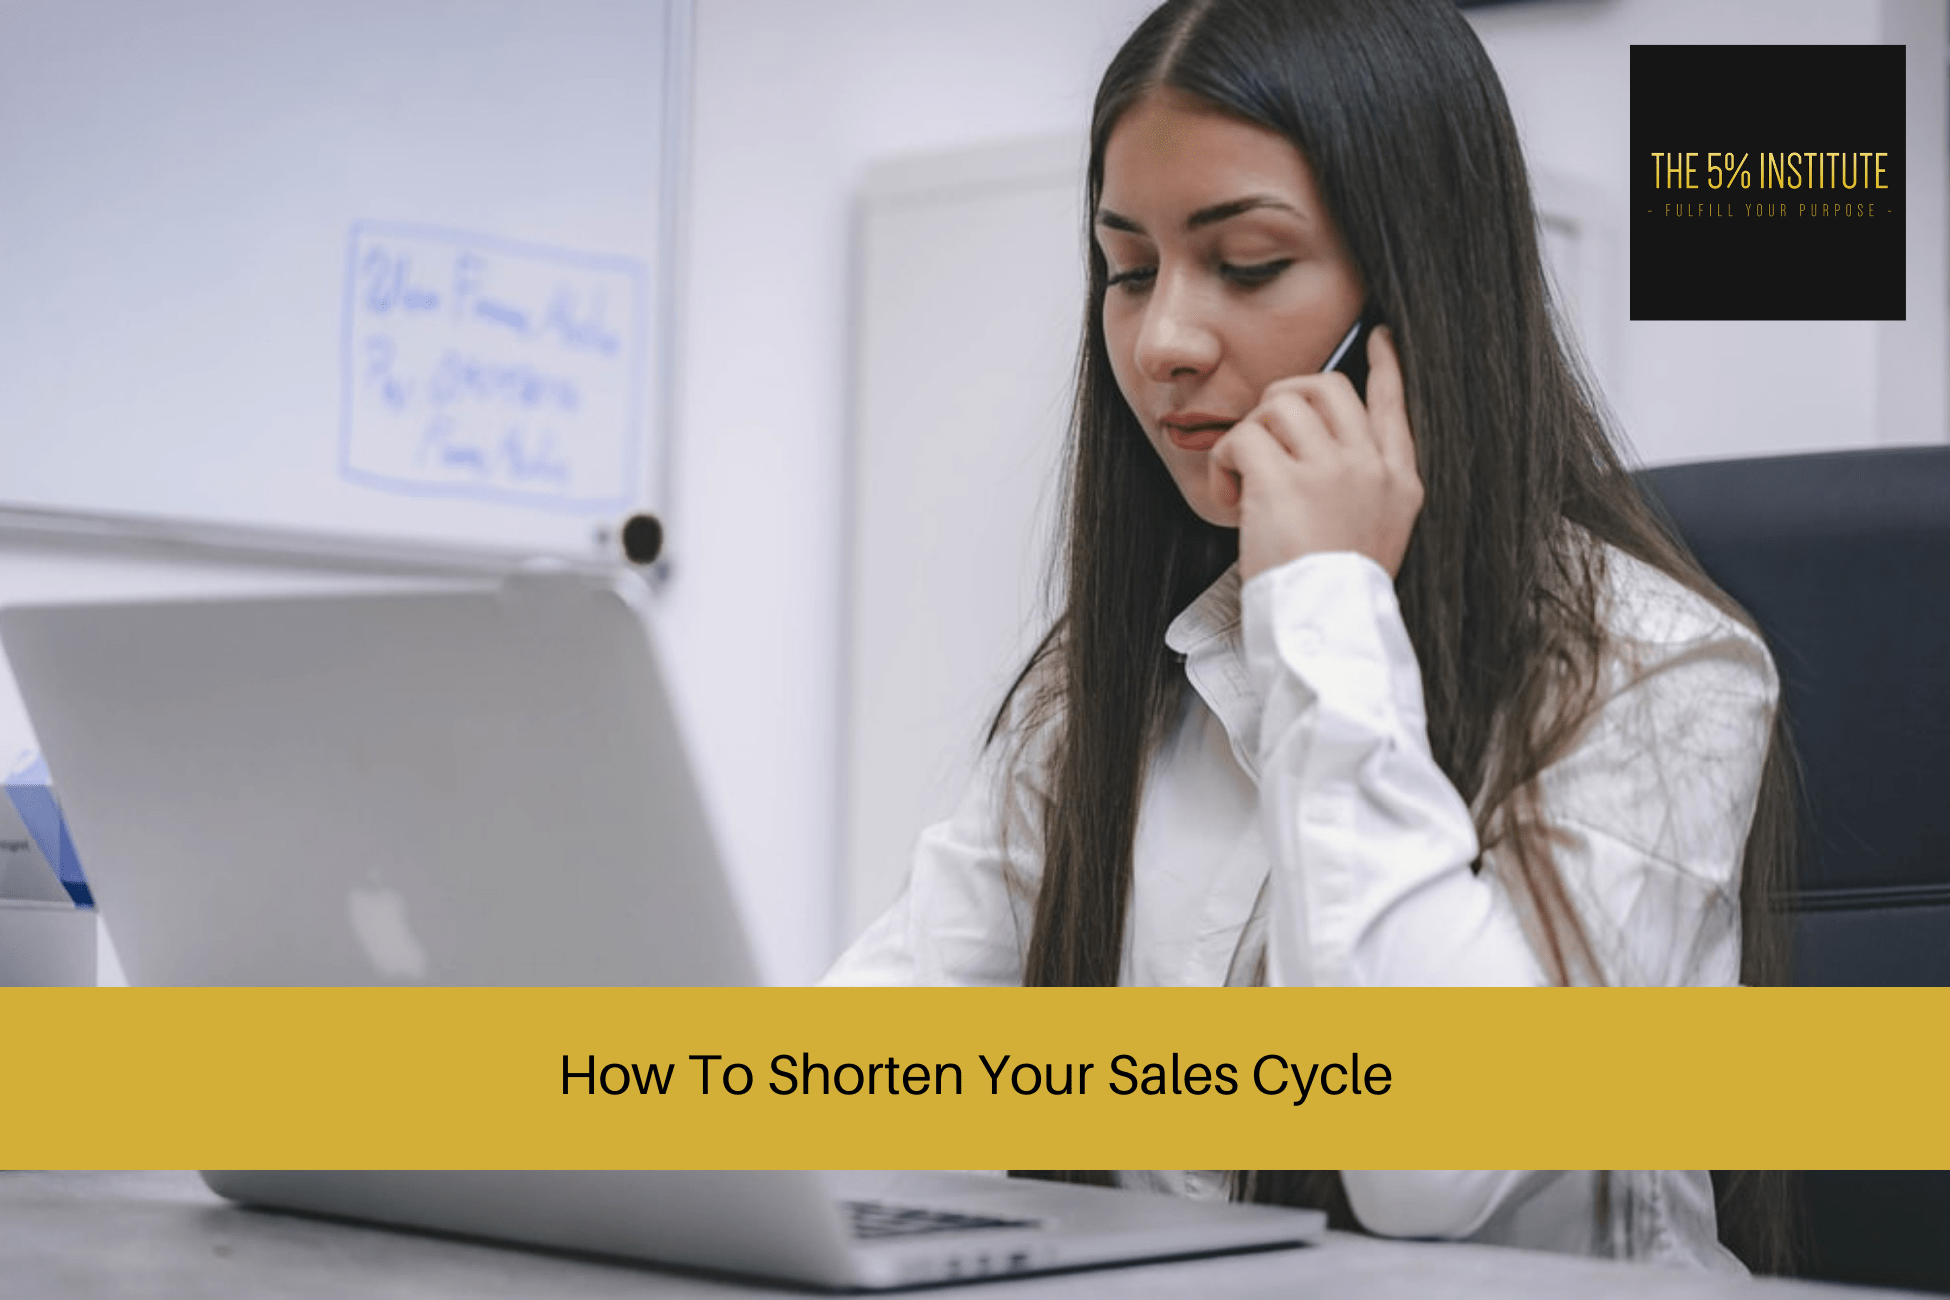 How To Shorten Your Sales Cycle